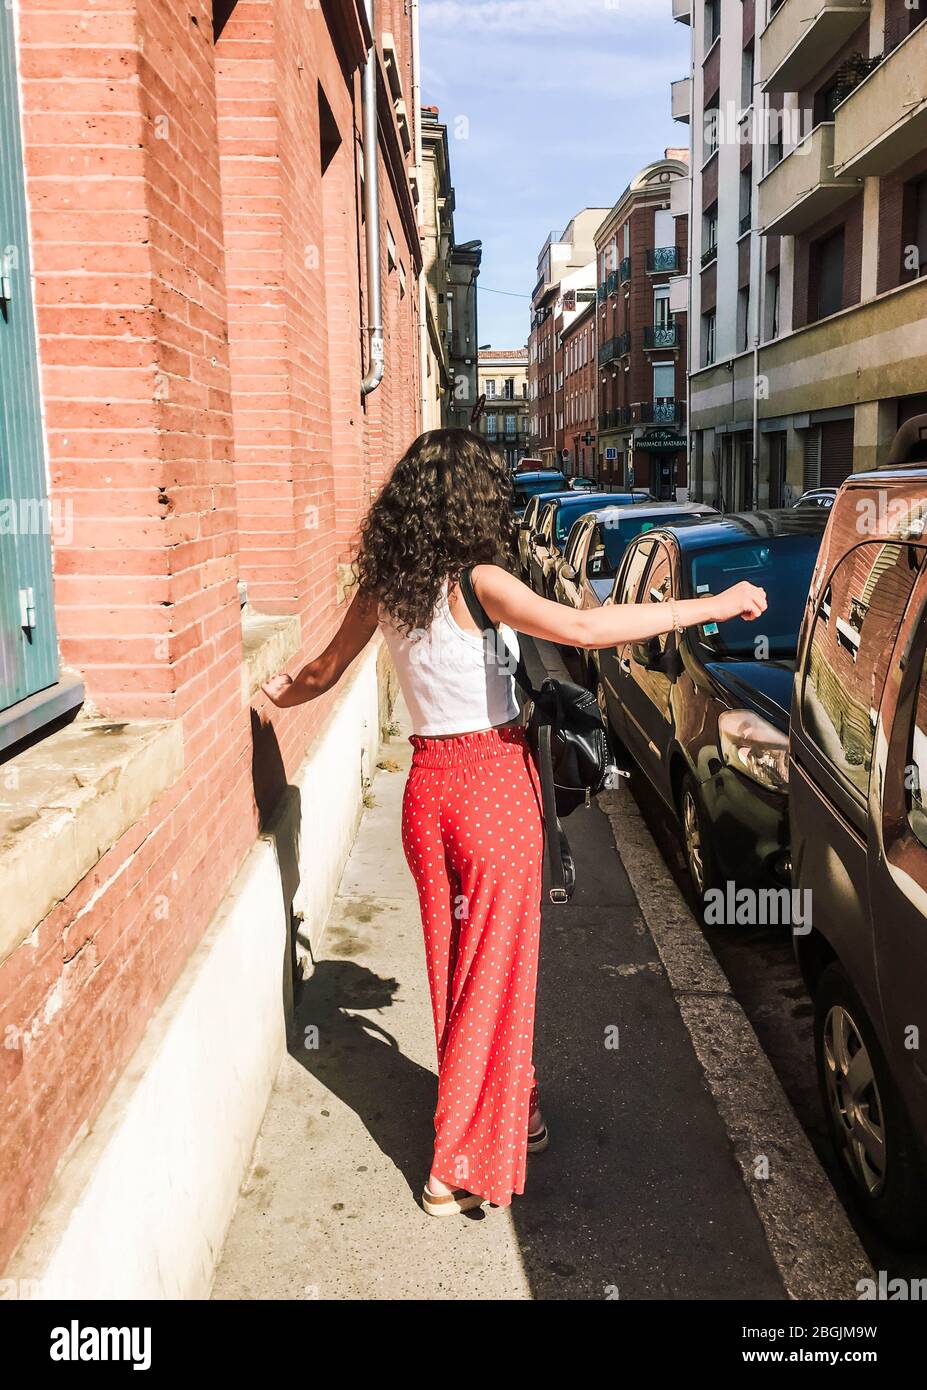 Woman dancing in the street Stock Photo